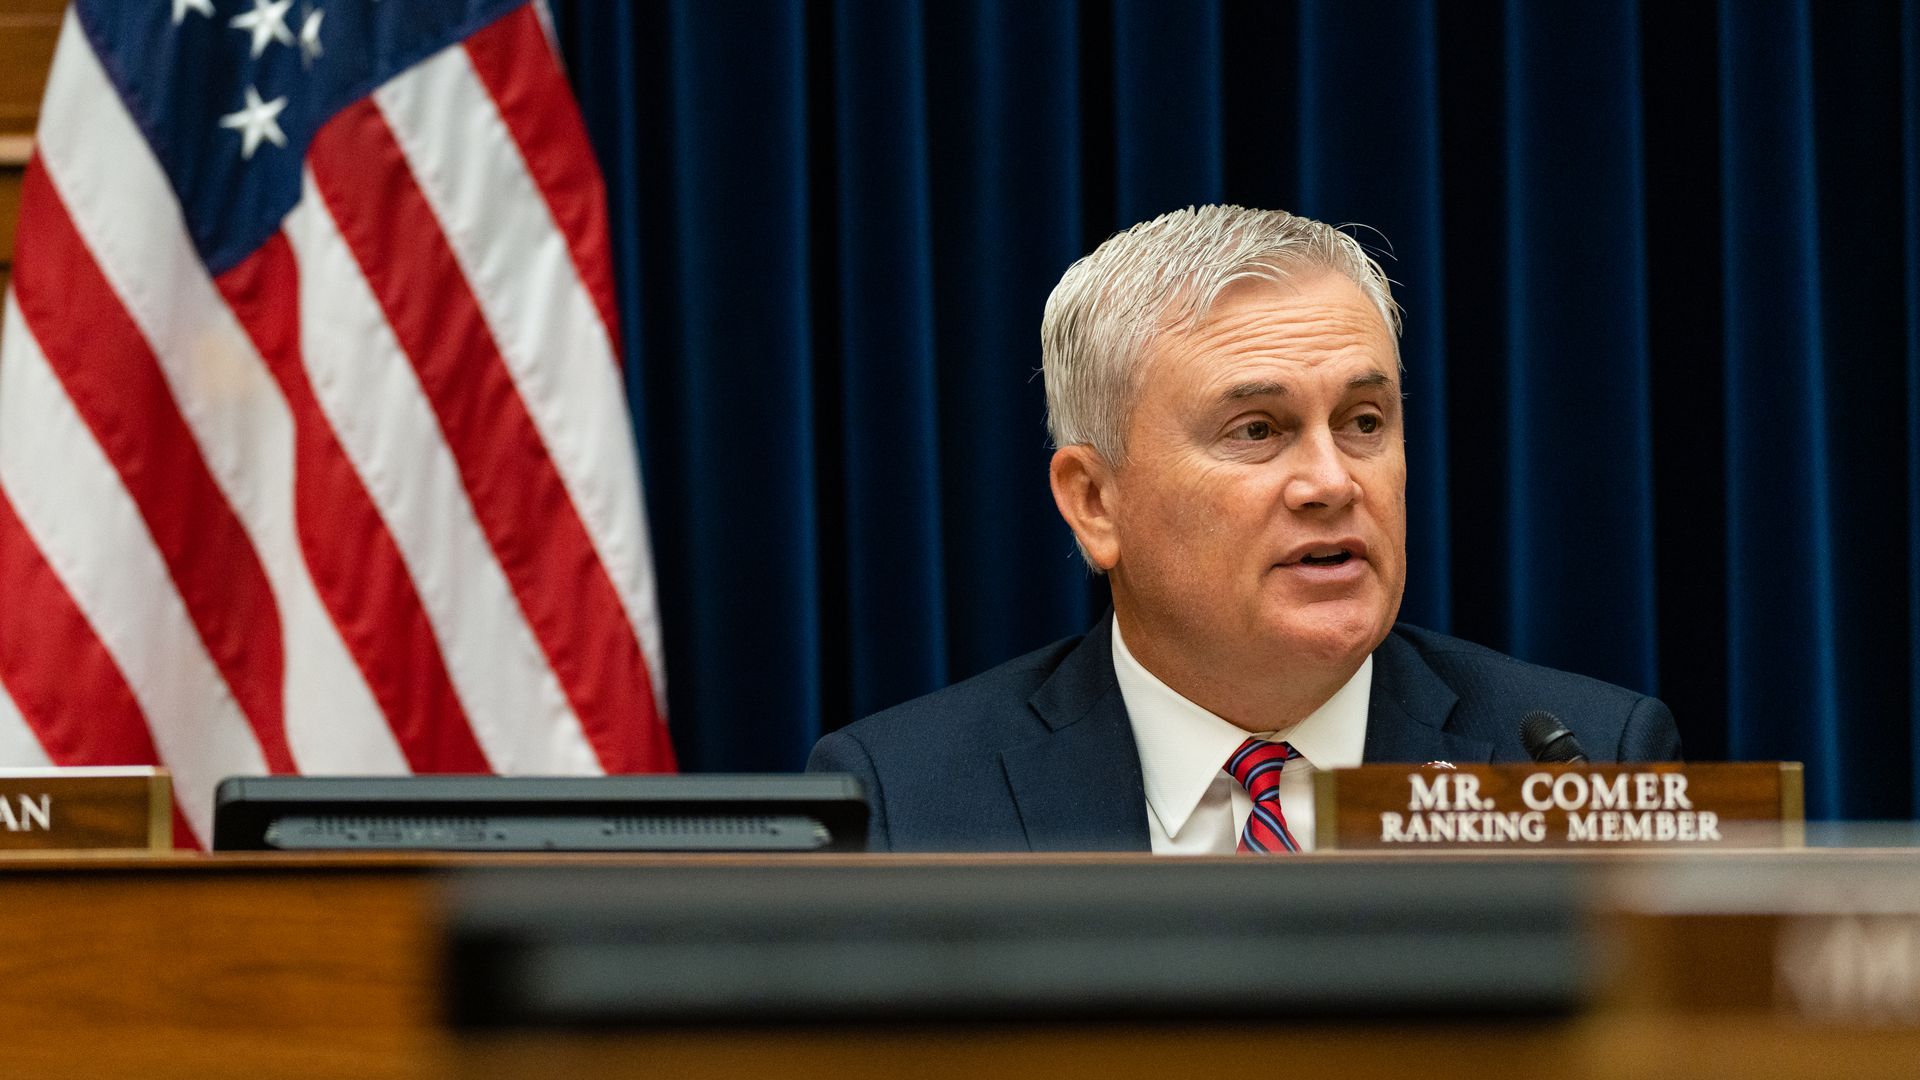 Rep. James Comer, wearing a blue suit and red tie, sits behind the dais and a placard with his name and title at a House Oversight Committee hearing.